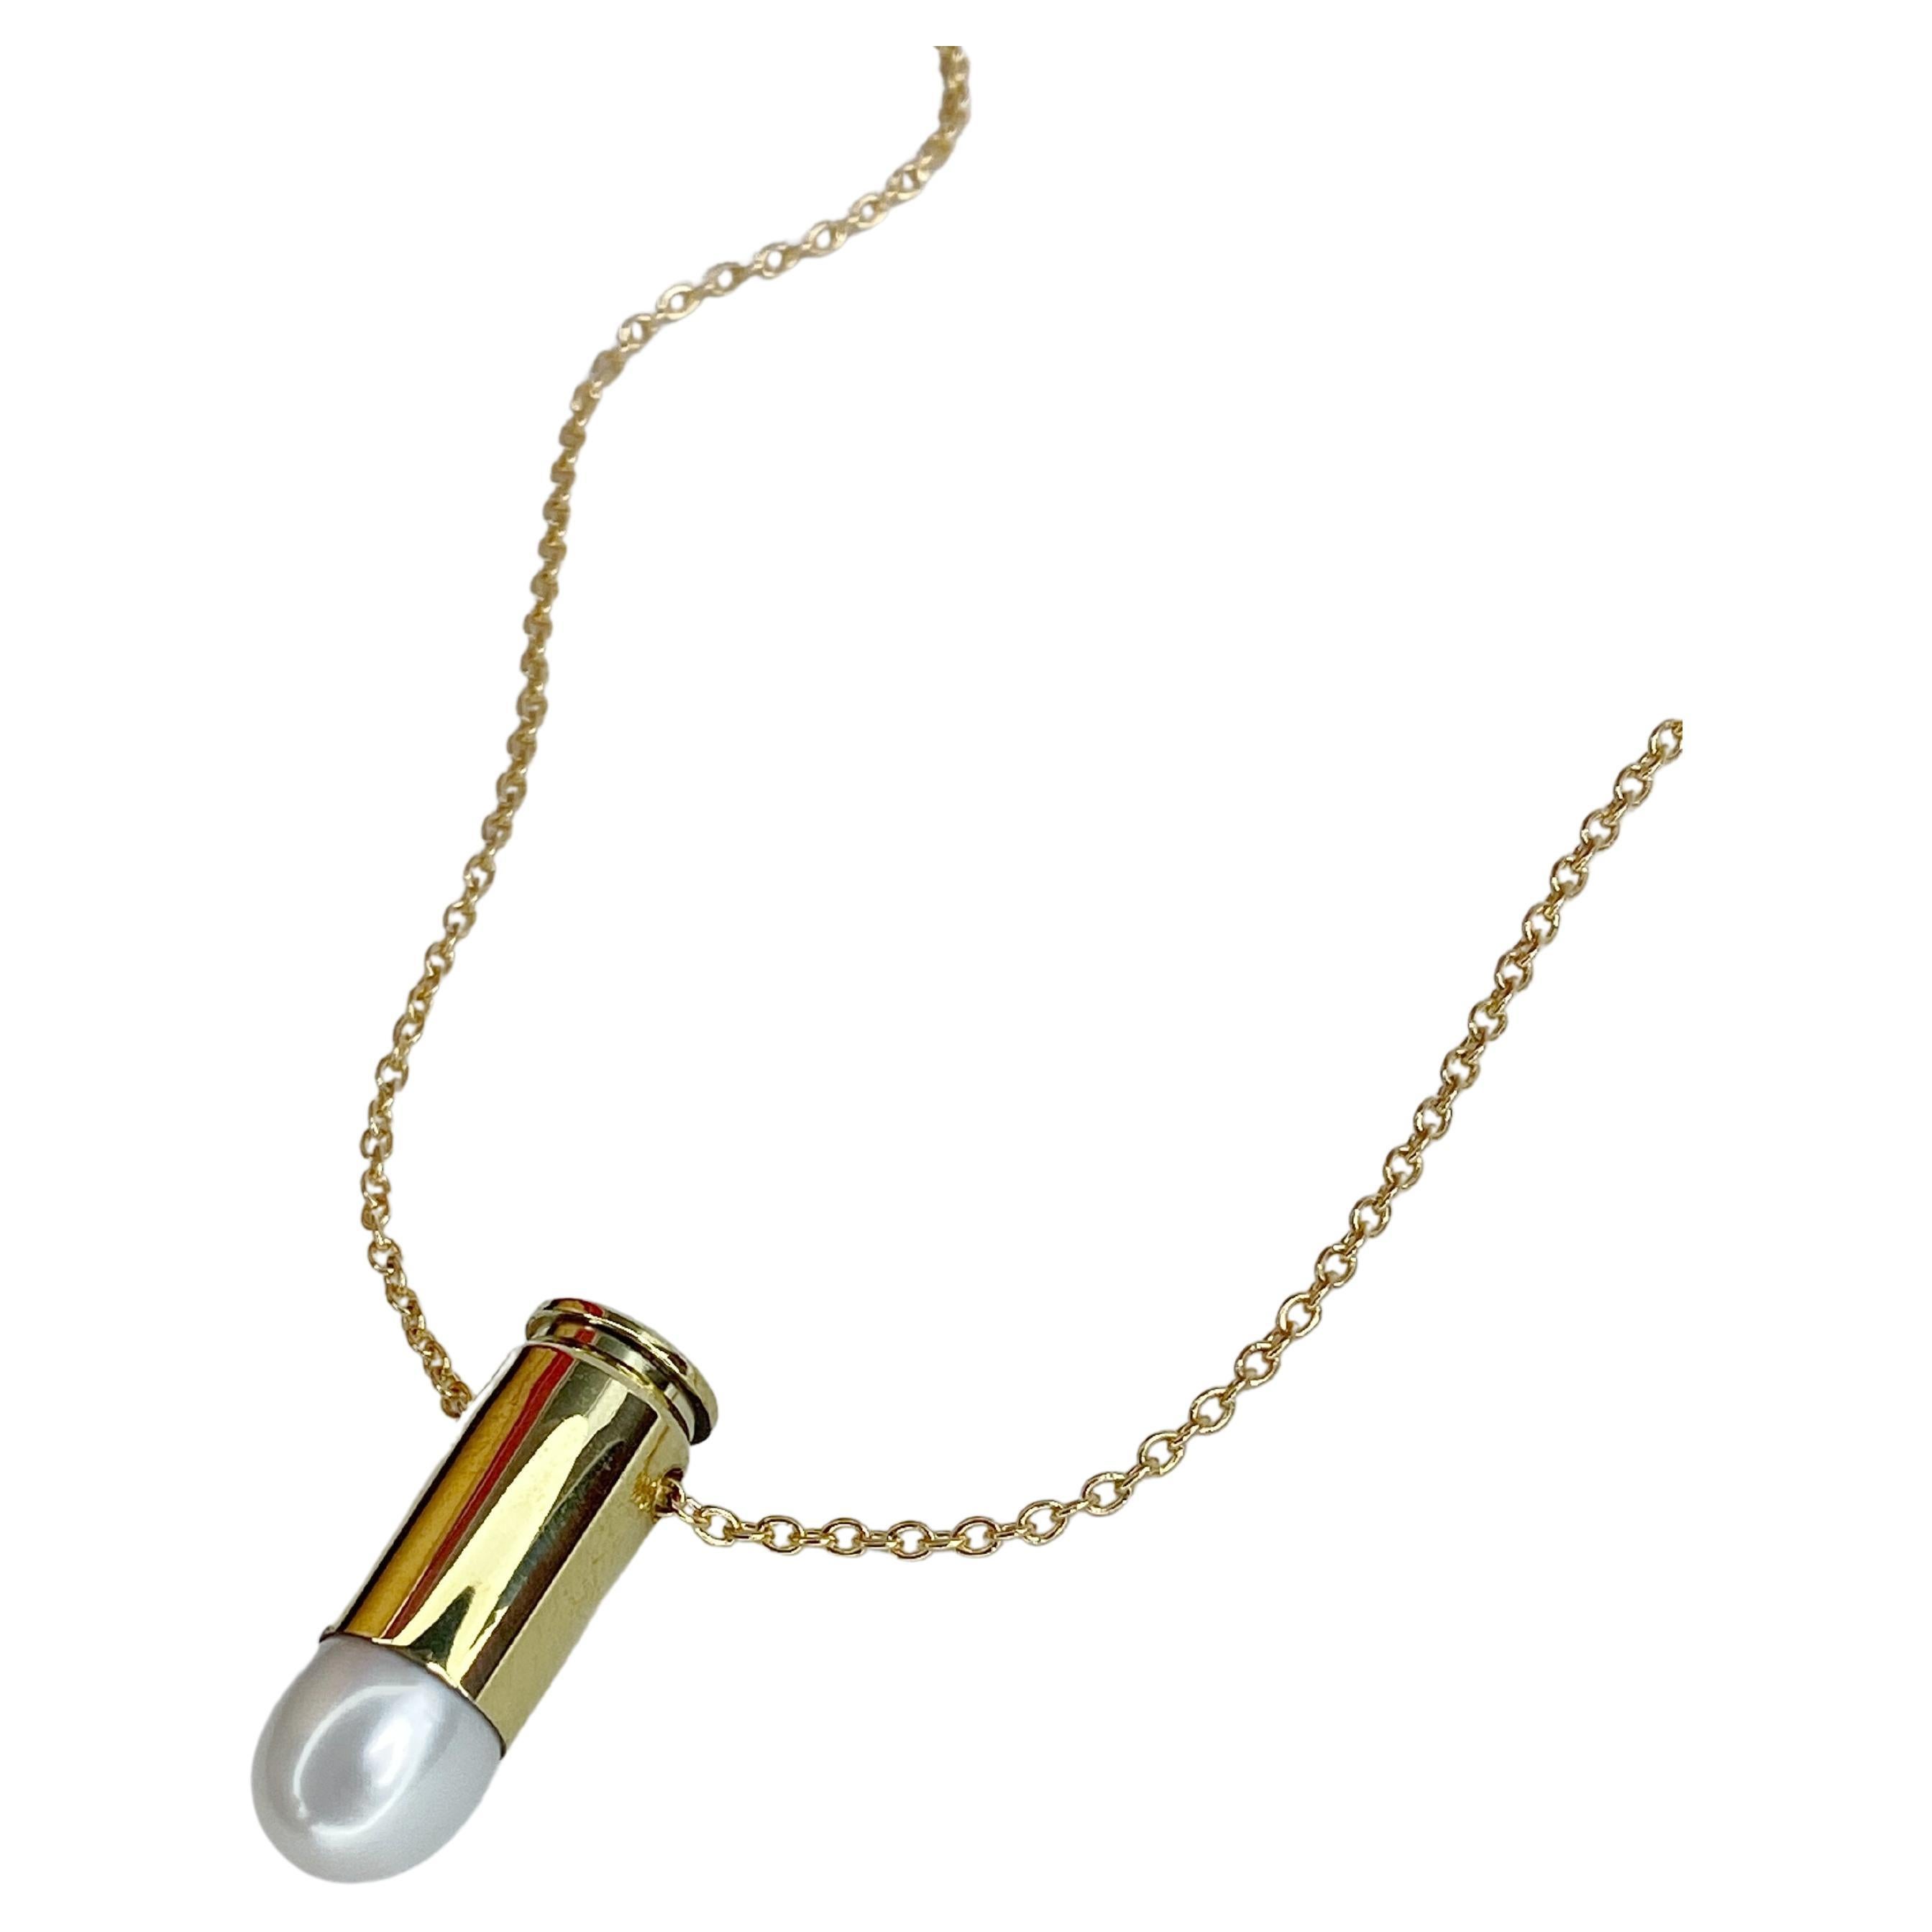 Freshwater pearl and gold filled bullet pendant.